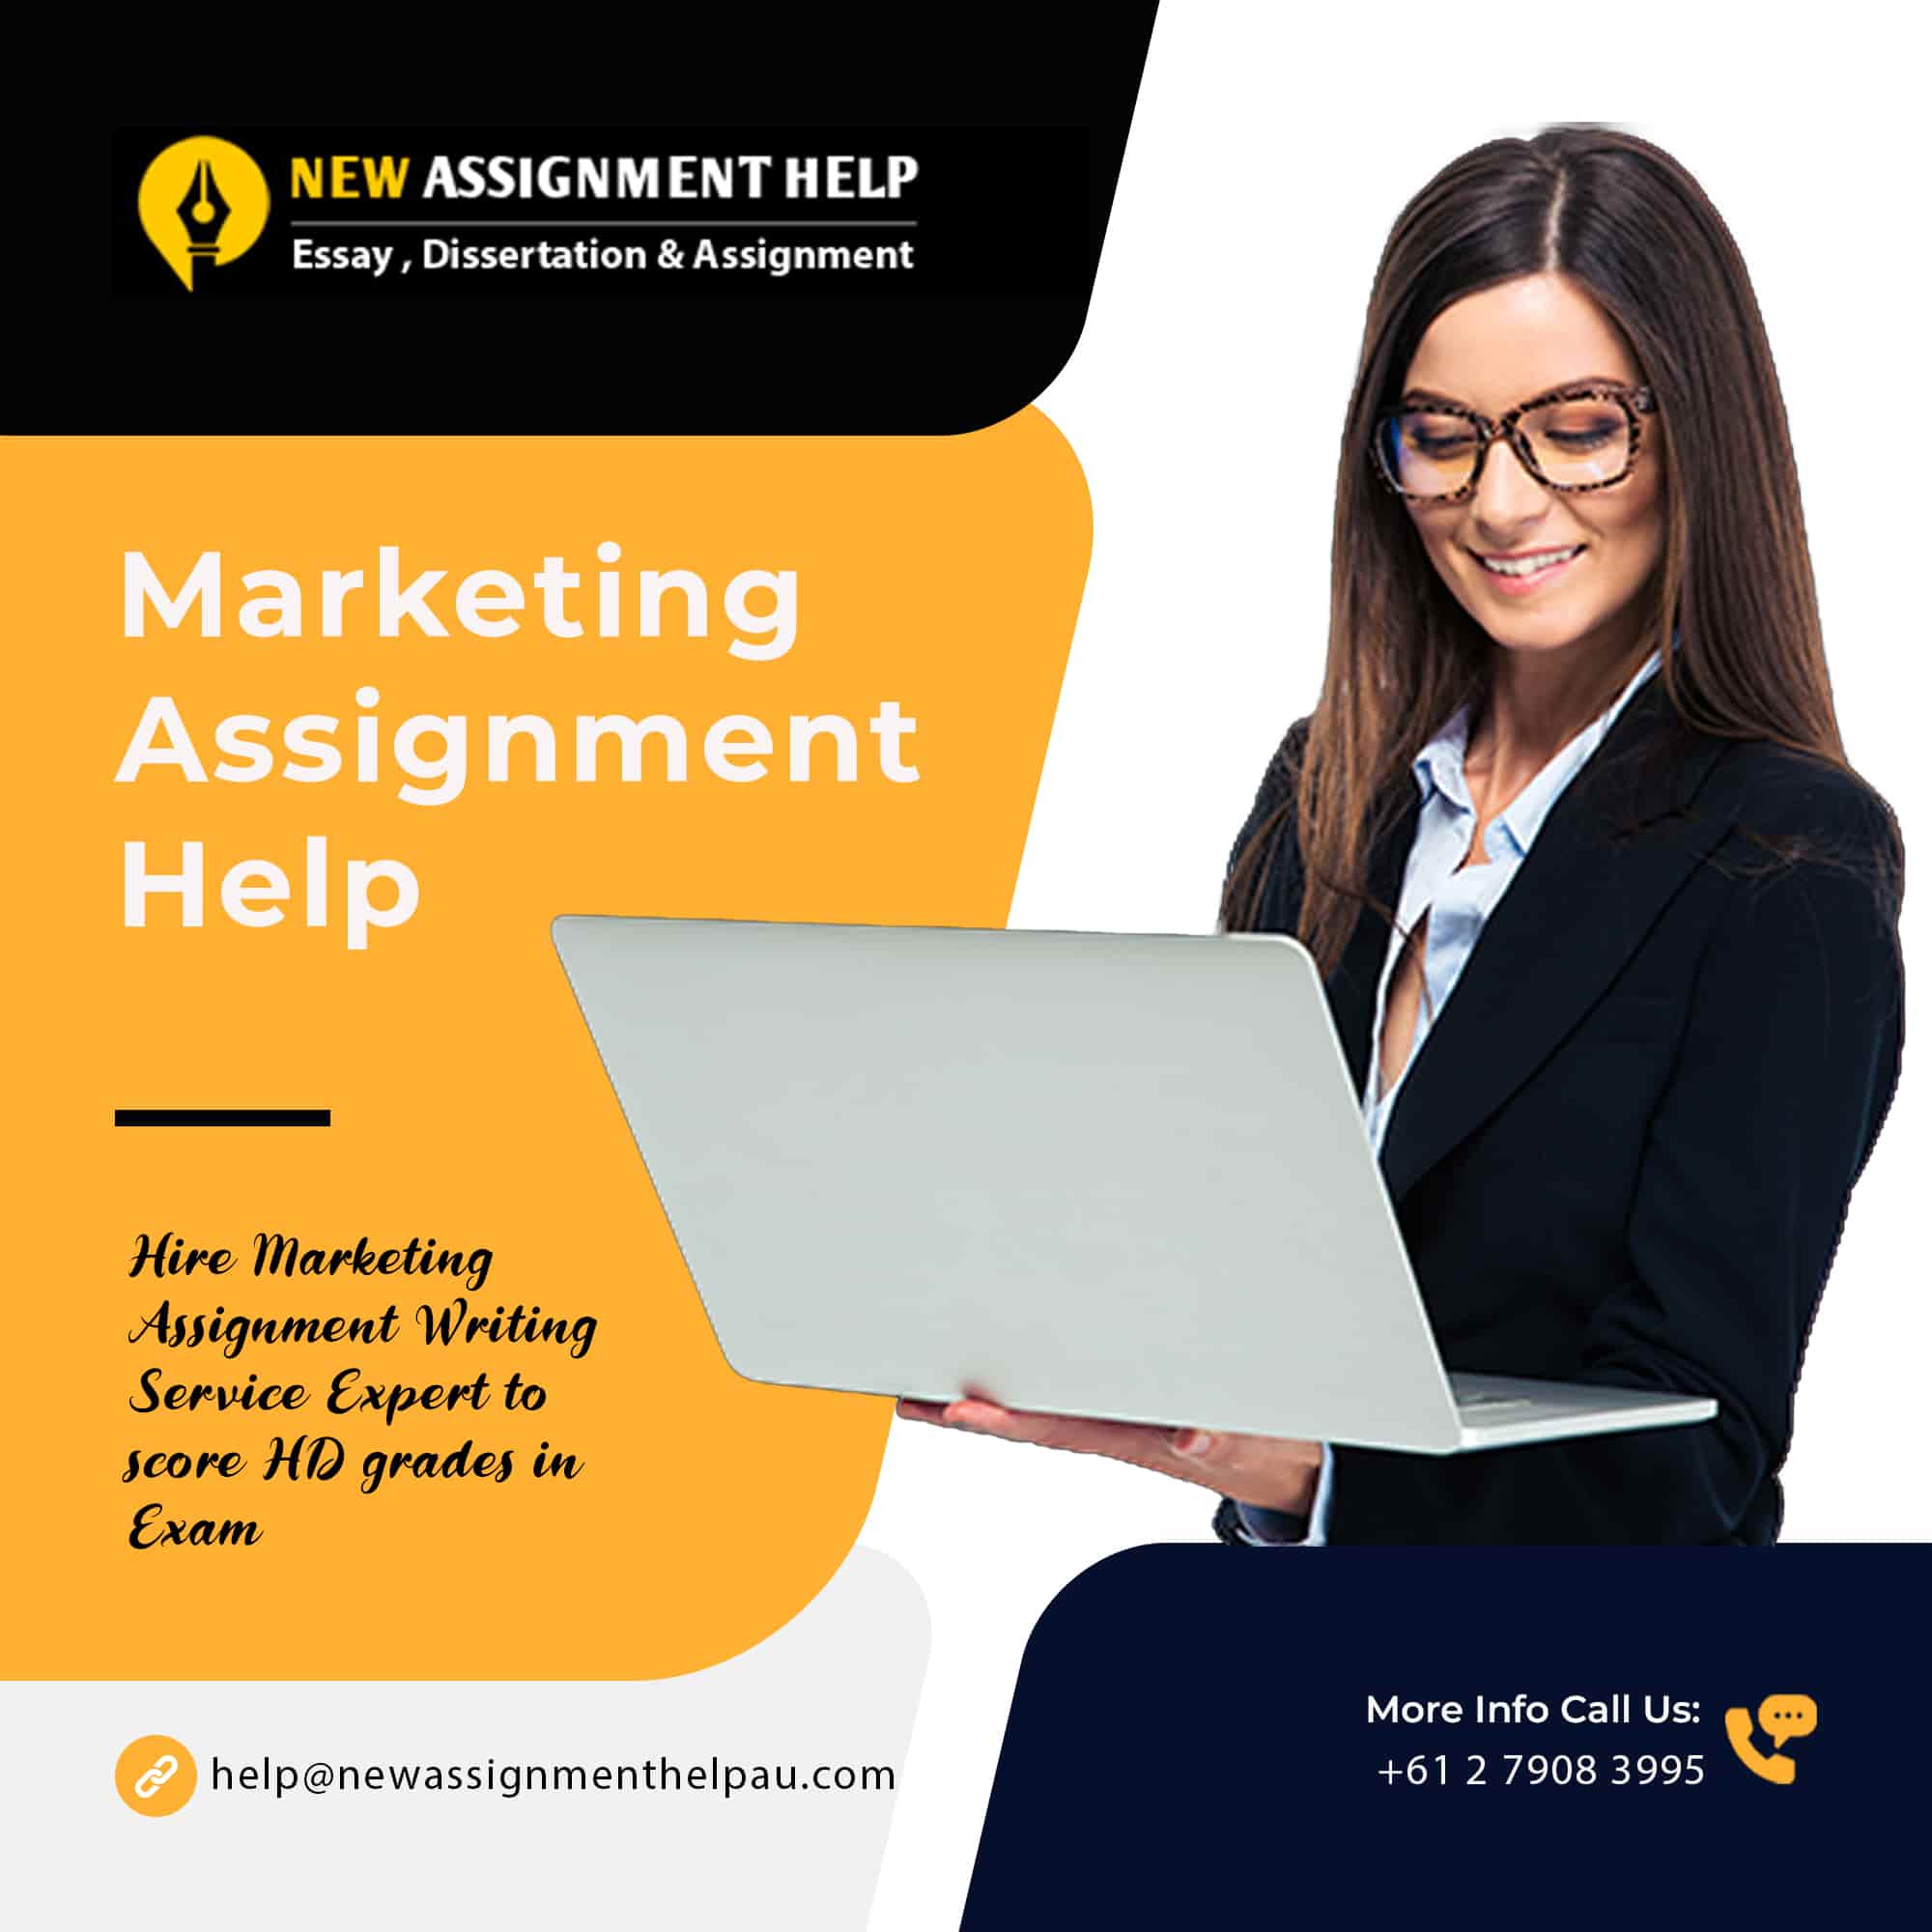 If you're struggling with your marketing assignments, our team of experts can provide the help you need. We offer comprehensive assistance with marketing assignments, from research and analysis to writing and editing. Contact us today For academic success.